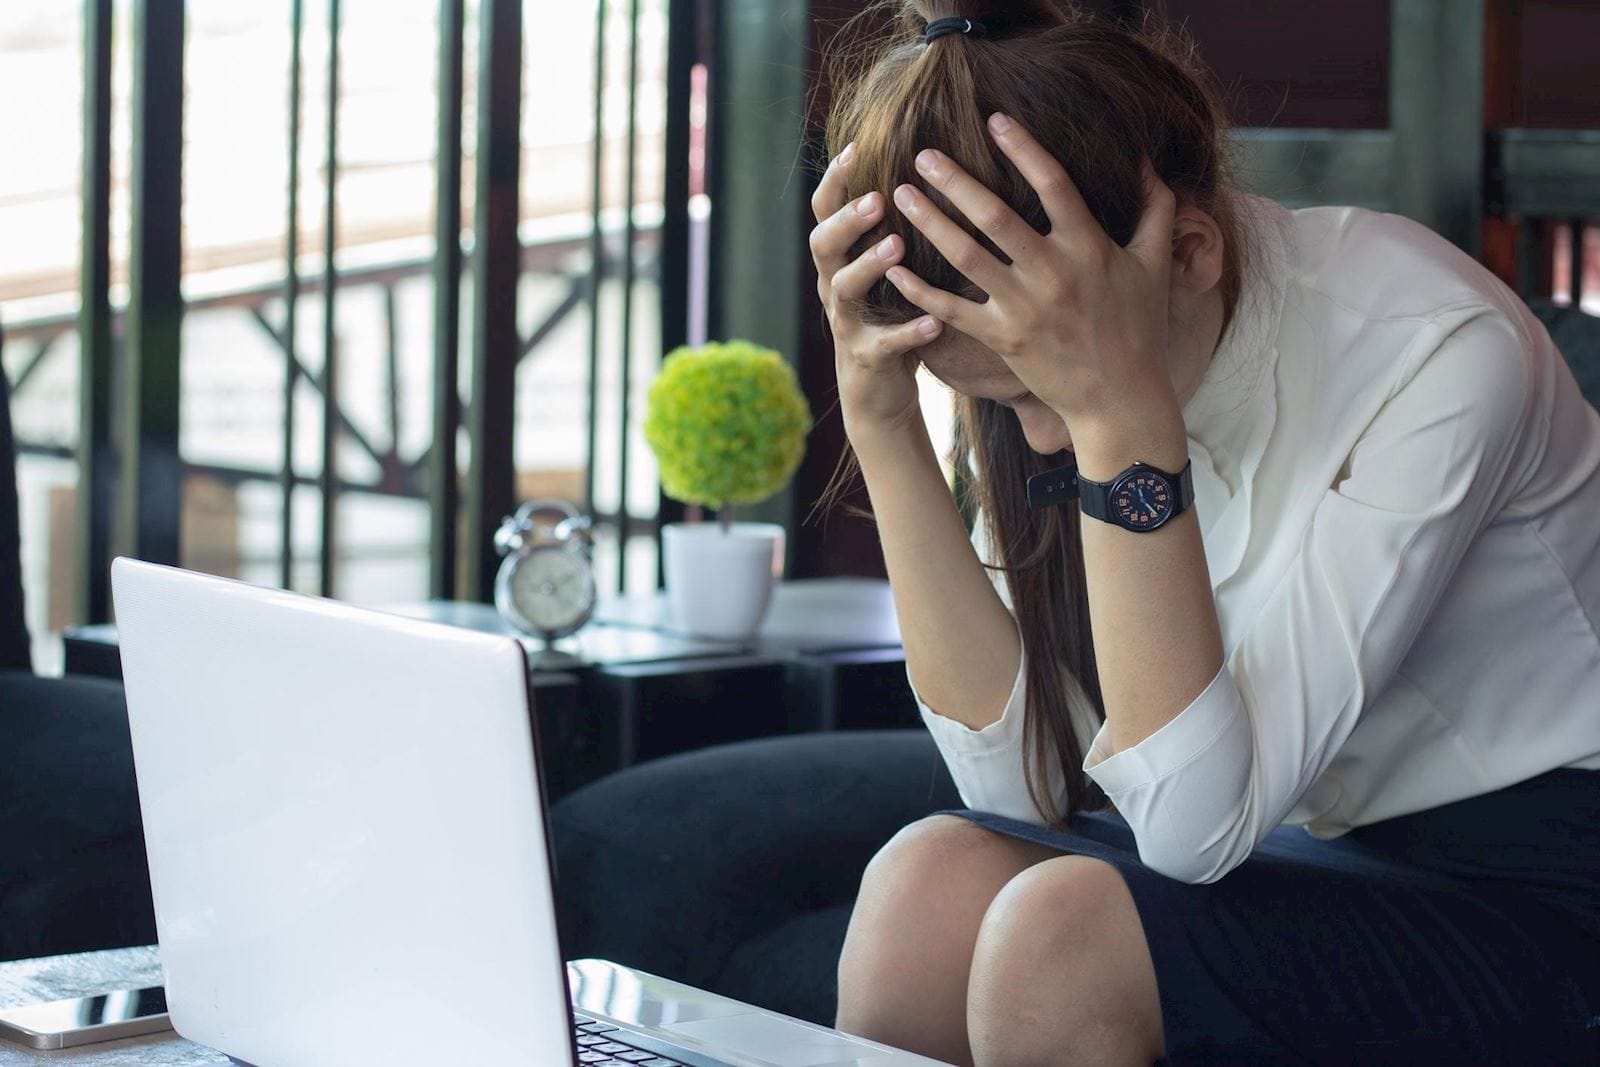 Stressed woman sits with her heads in her hands in front of her laptop computer